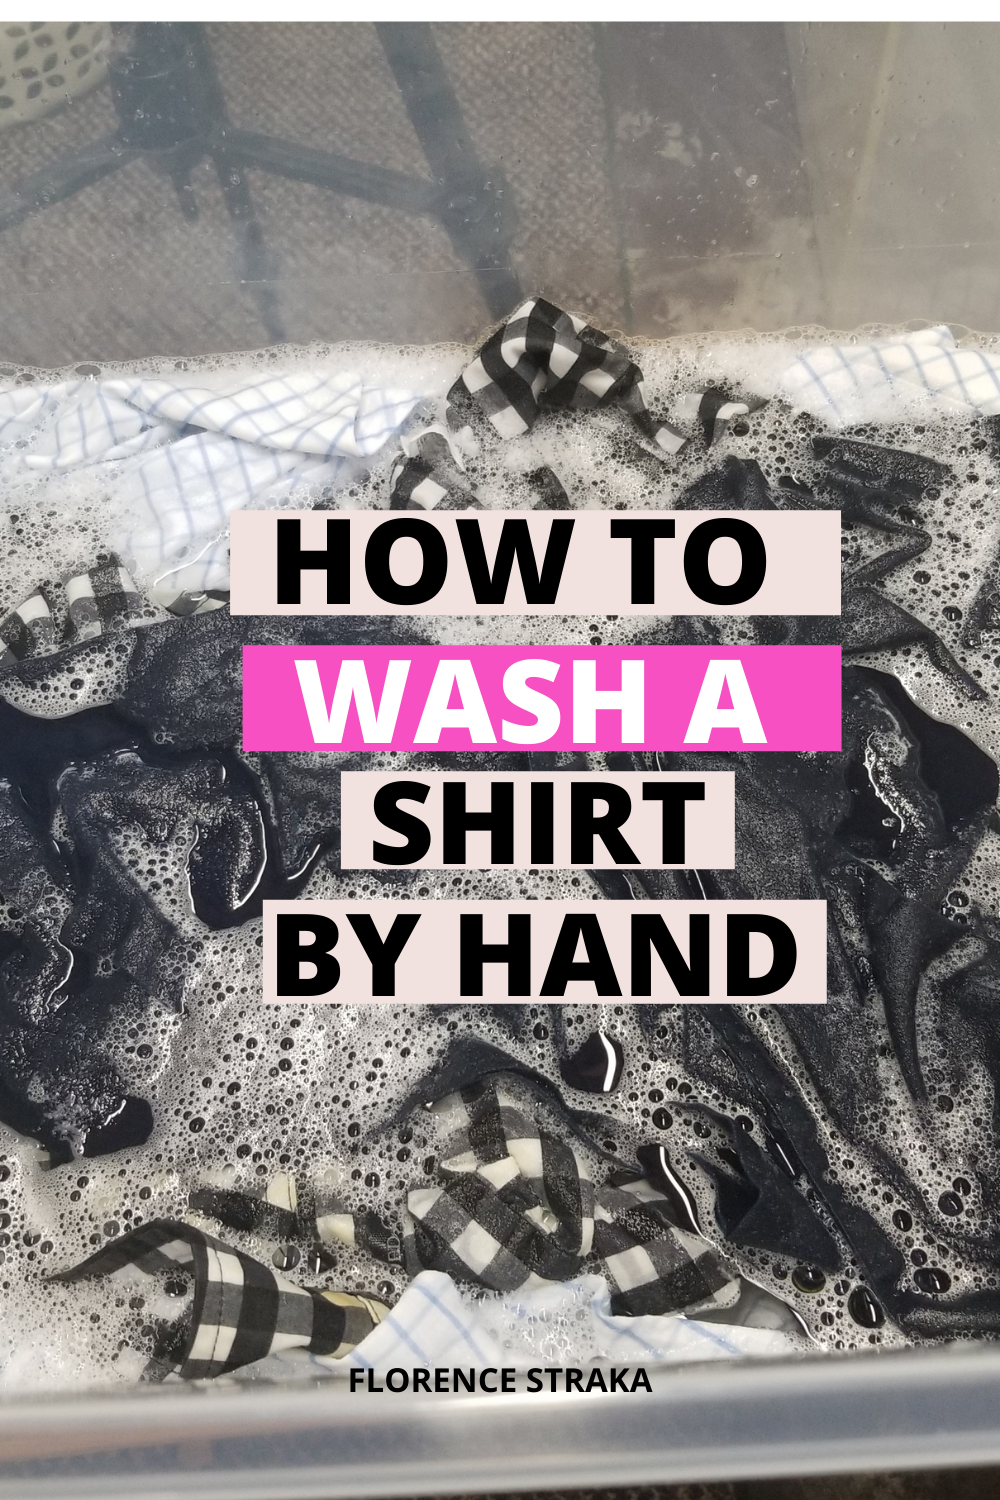 How to wash a shirt by hand